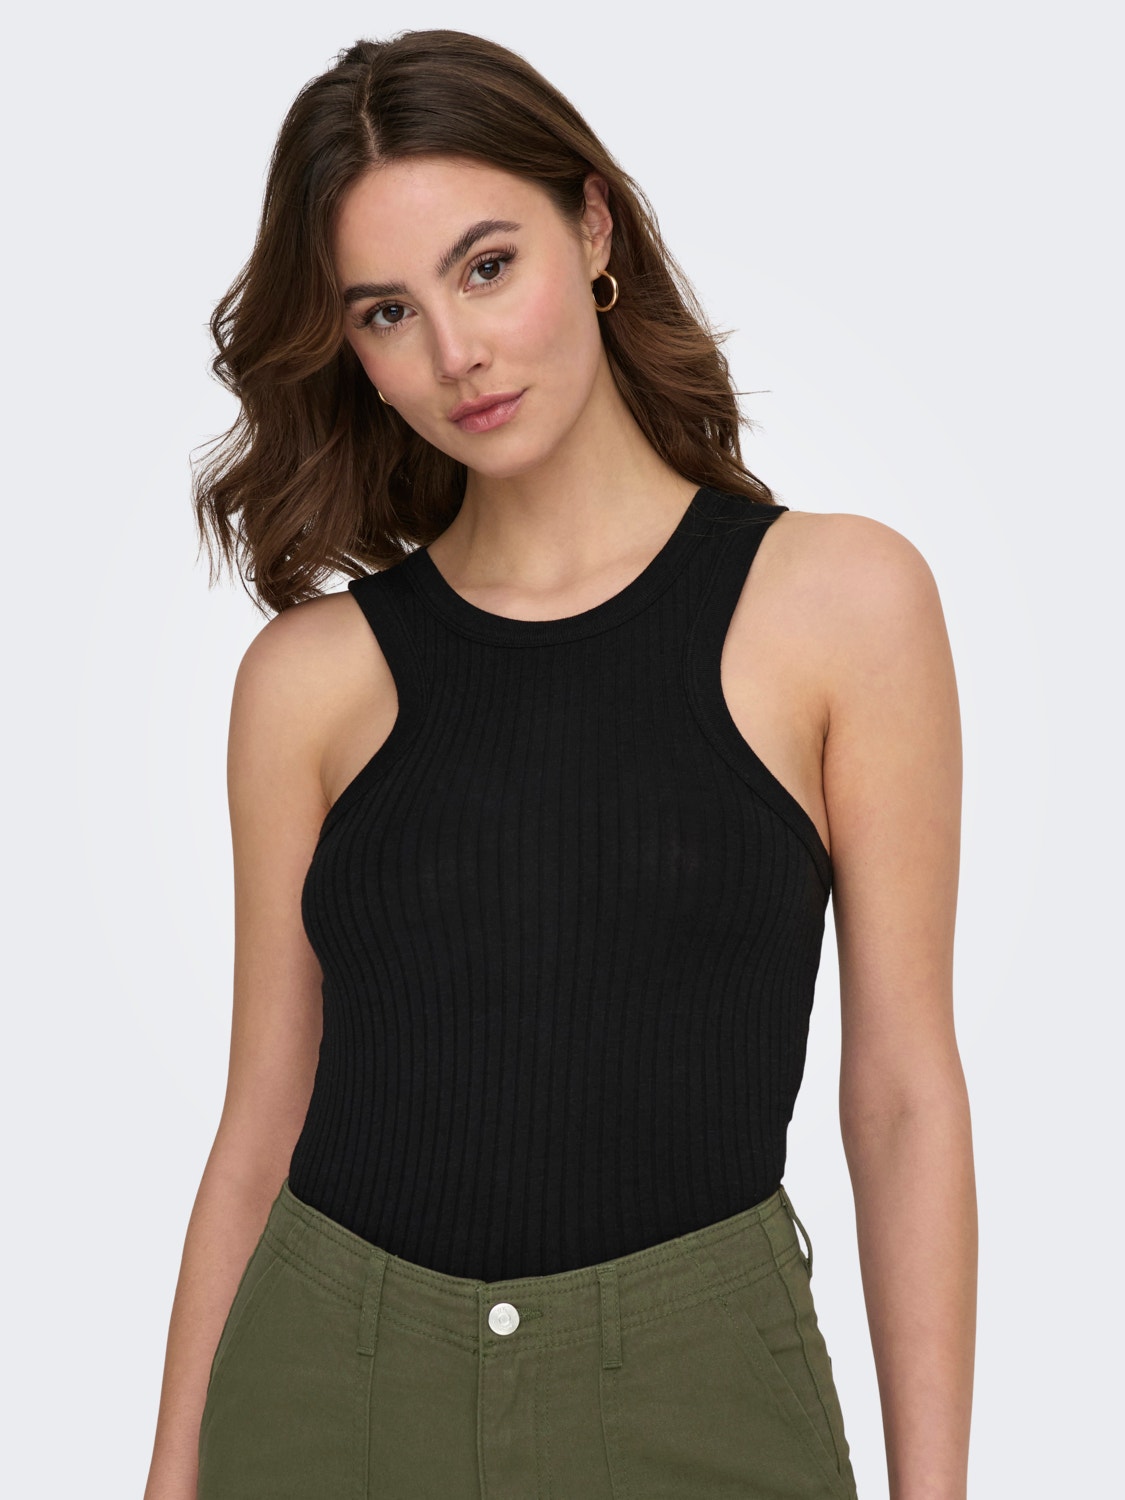 Slim Fit O-Neck Tank-Top with 40% discount!